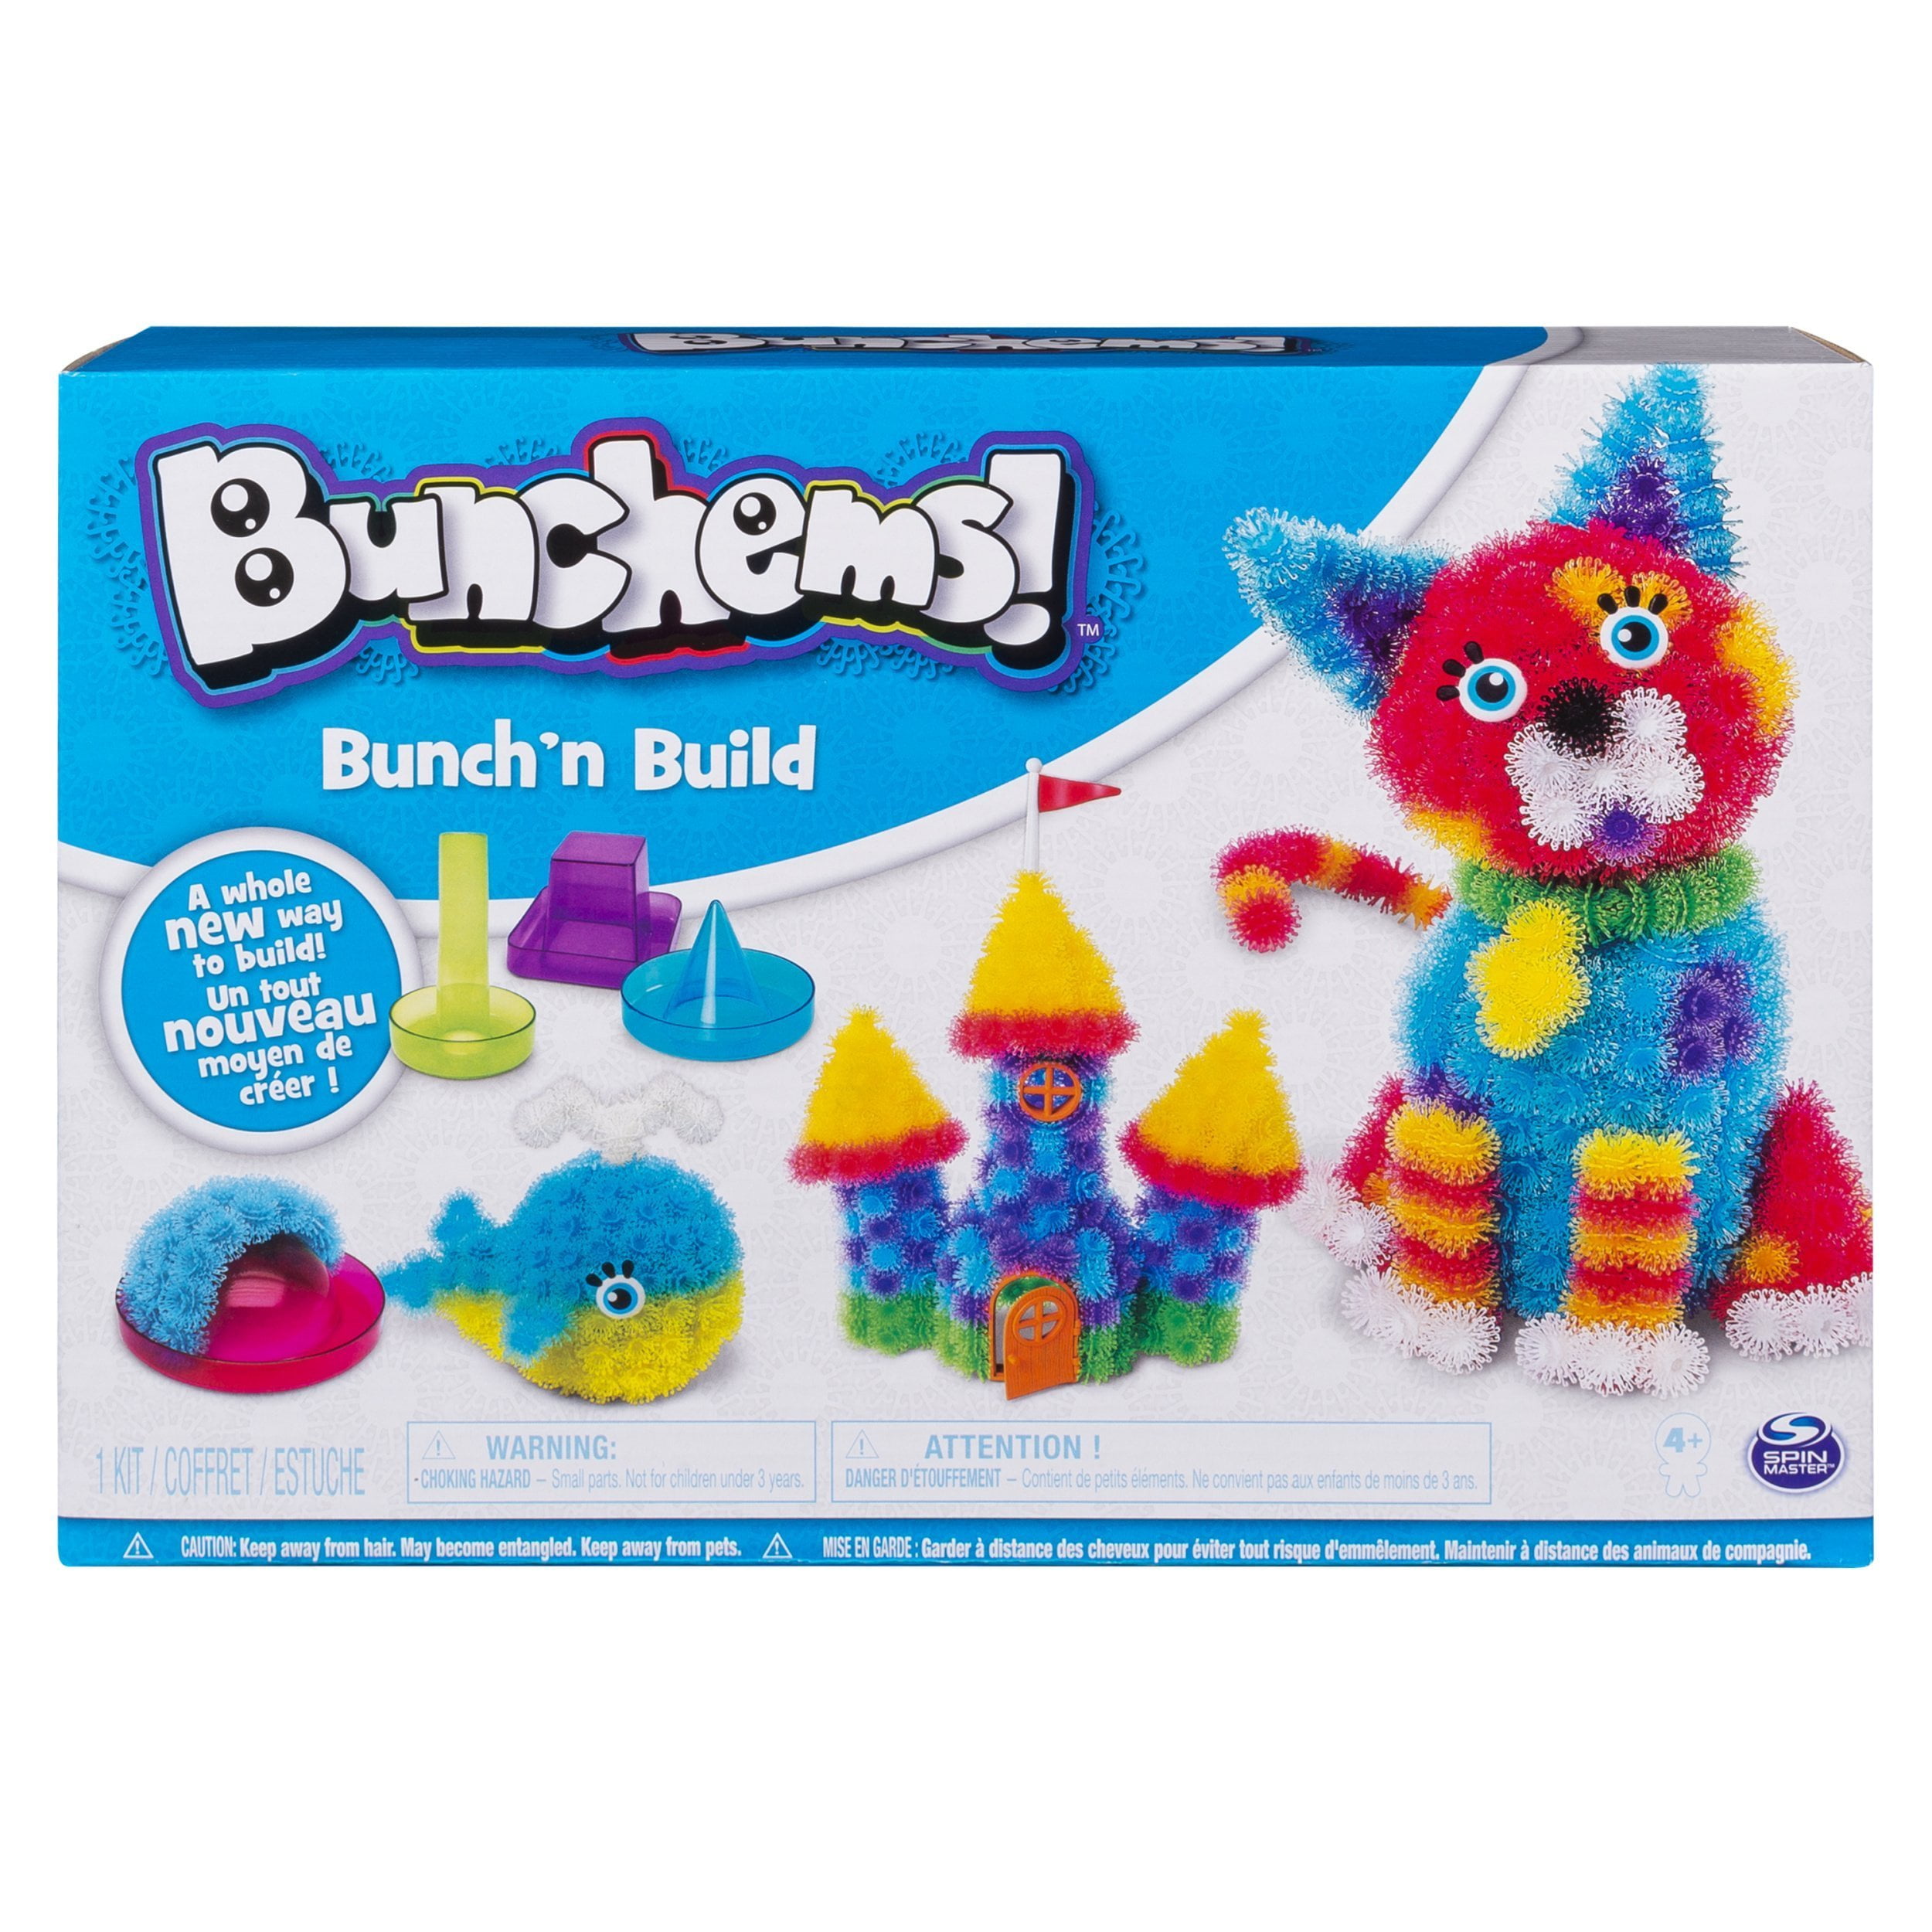 Bunchems Bunch’n Build Activity Kit with 4 Shaper Moulds and 400 Bunchems for Ages 6 and Up